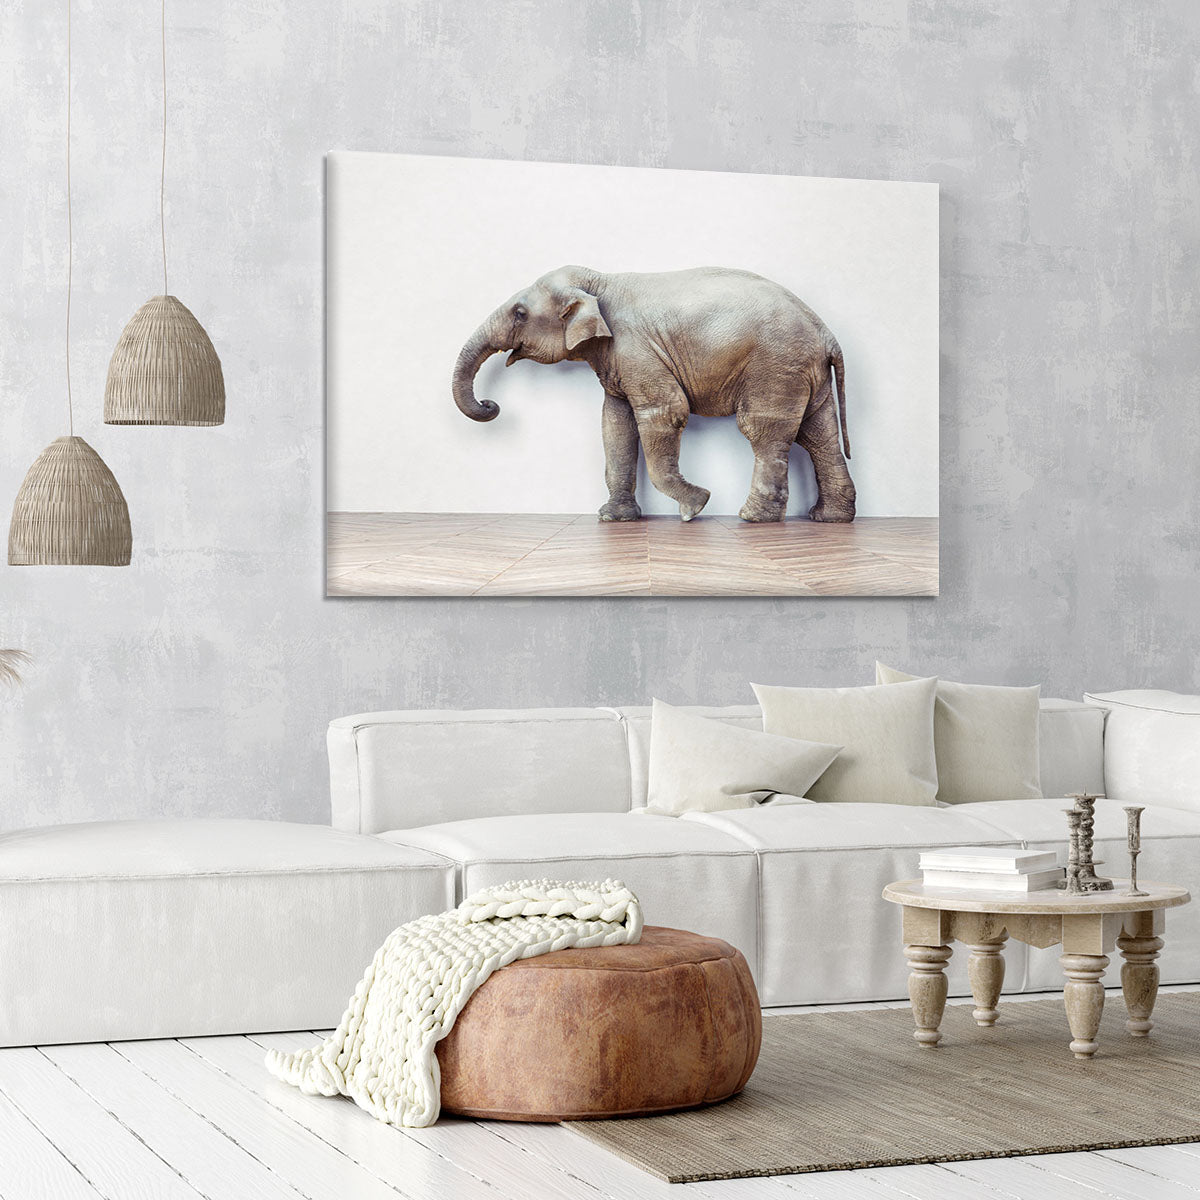 The elephant calm in the room near white wall Canvas Print or Poster - Canvas Art Rocks - 6